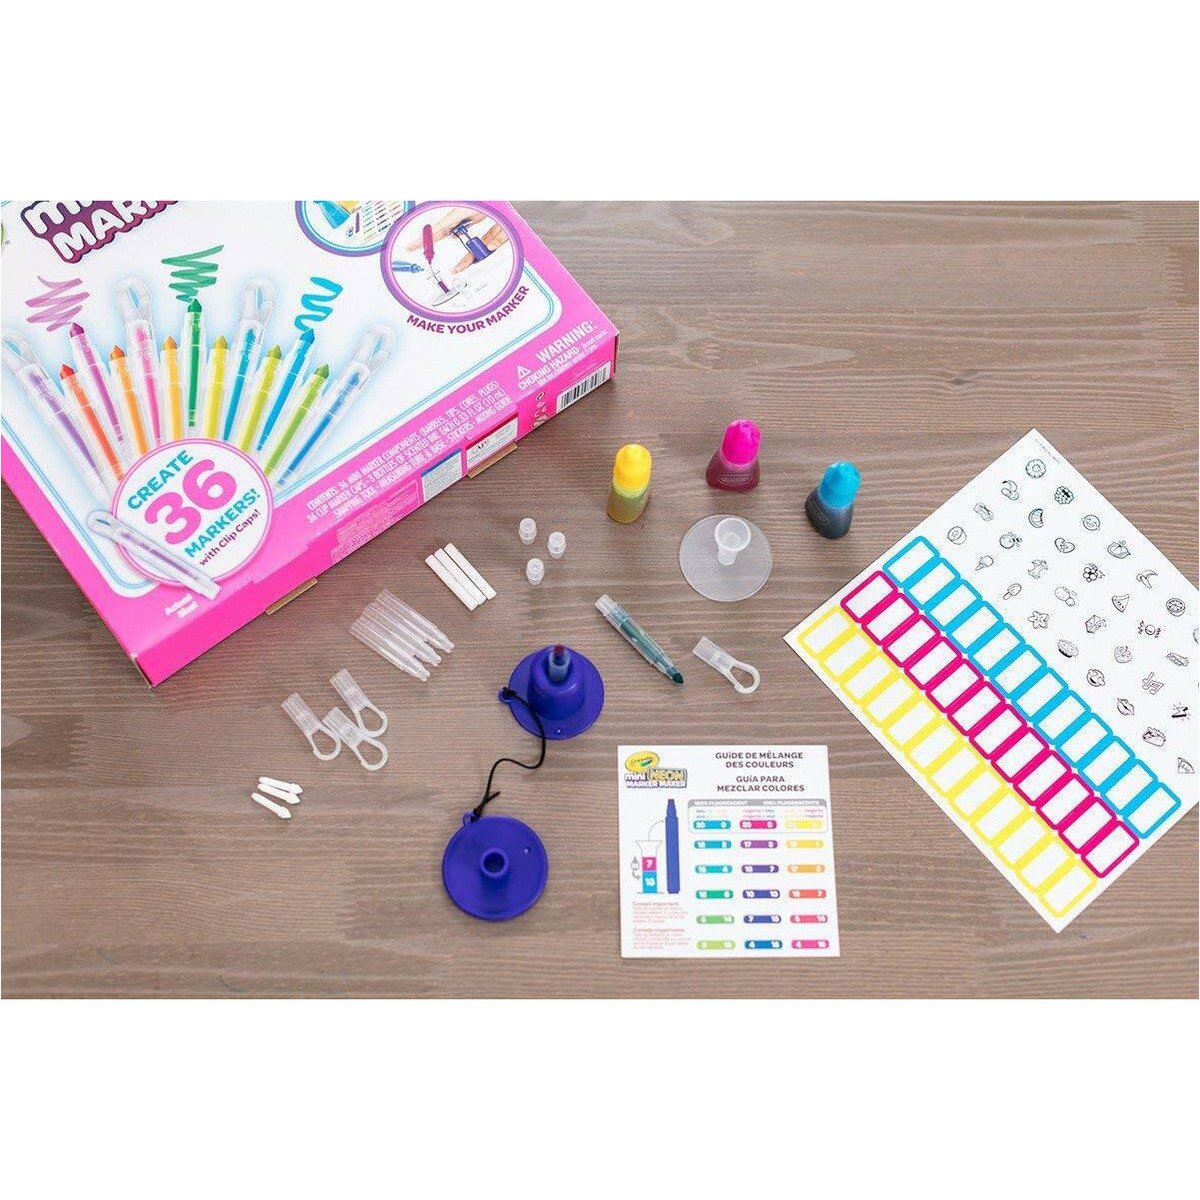 https://images.verishop.com/crayola-crayola-mini-neon-marker-maker-36-markers-with-clips-caps/M00071662072483-3340479870?auto=format&cs=strip&fit=max&w=1200